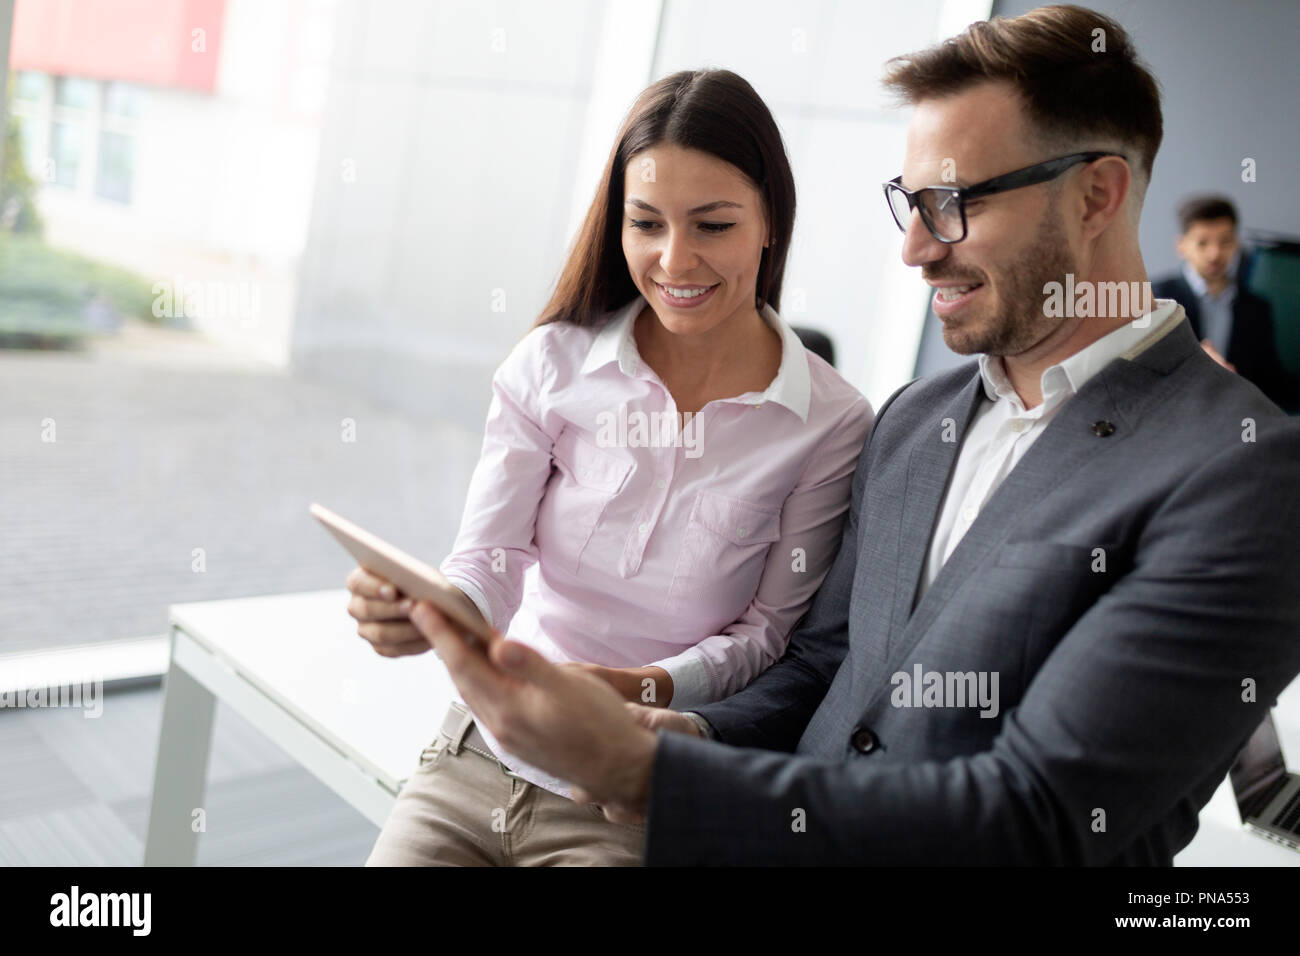 Business colleagues in conference meeting room during presentation Stock Photo